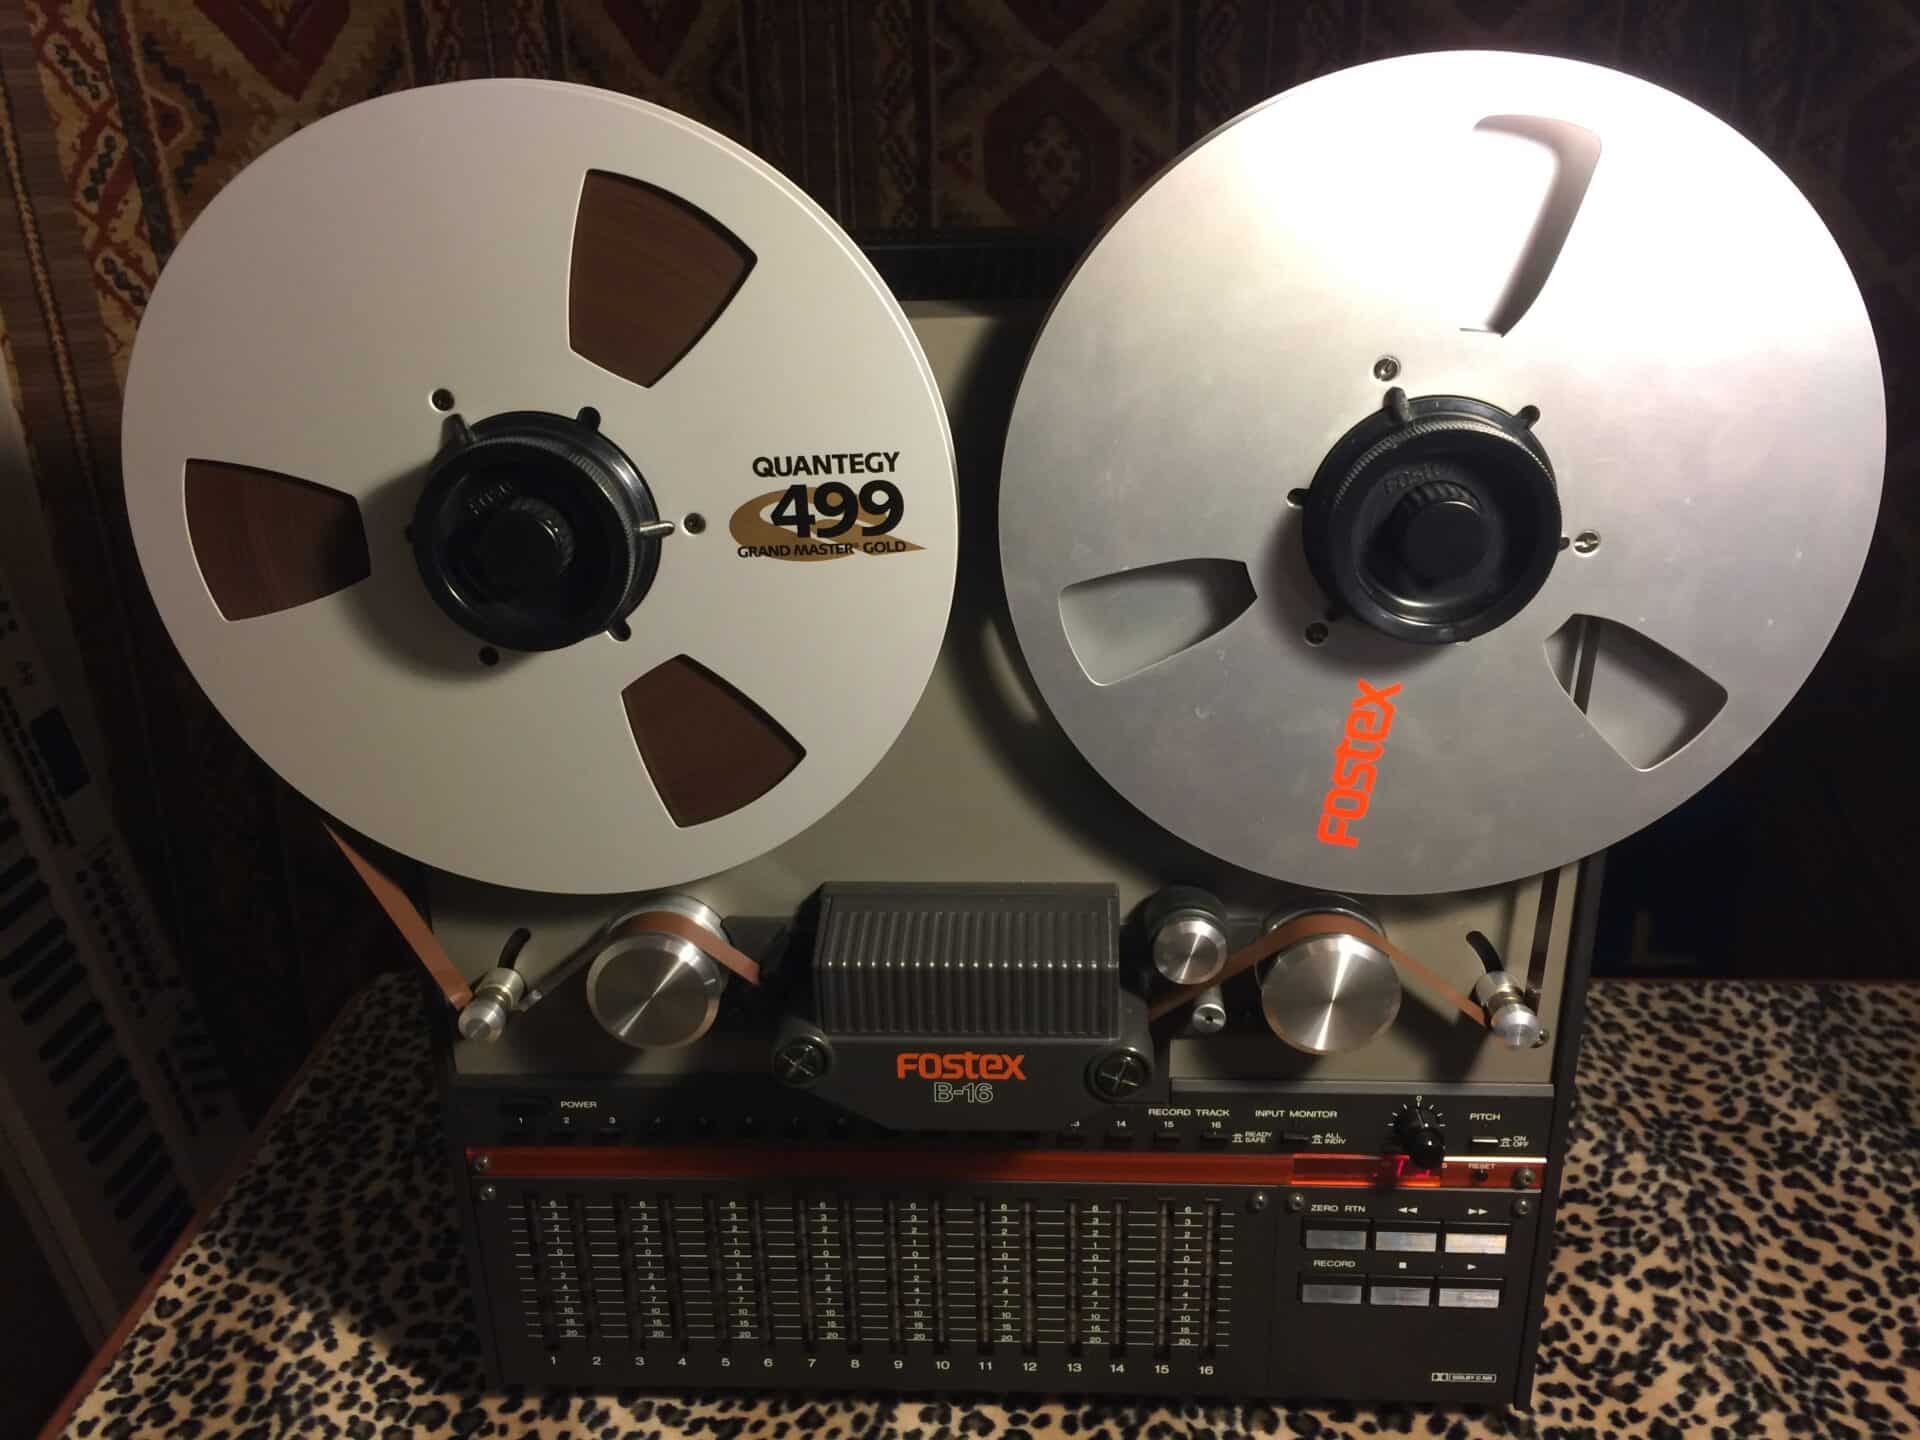 Fostex E-16 - 16 Track 1/2 Reel to Reel tape recorder 